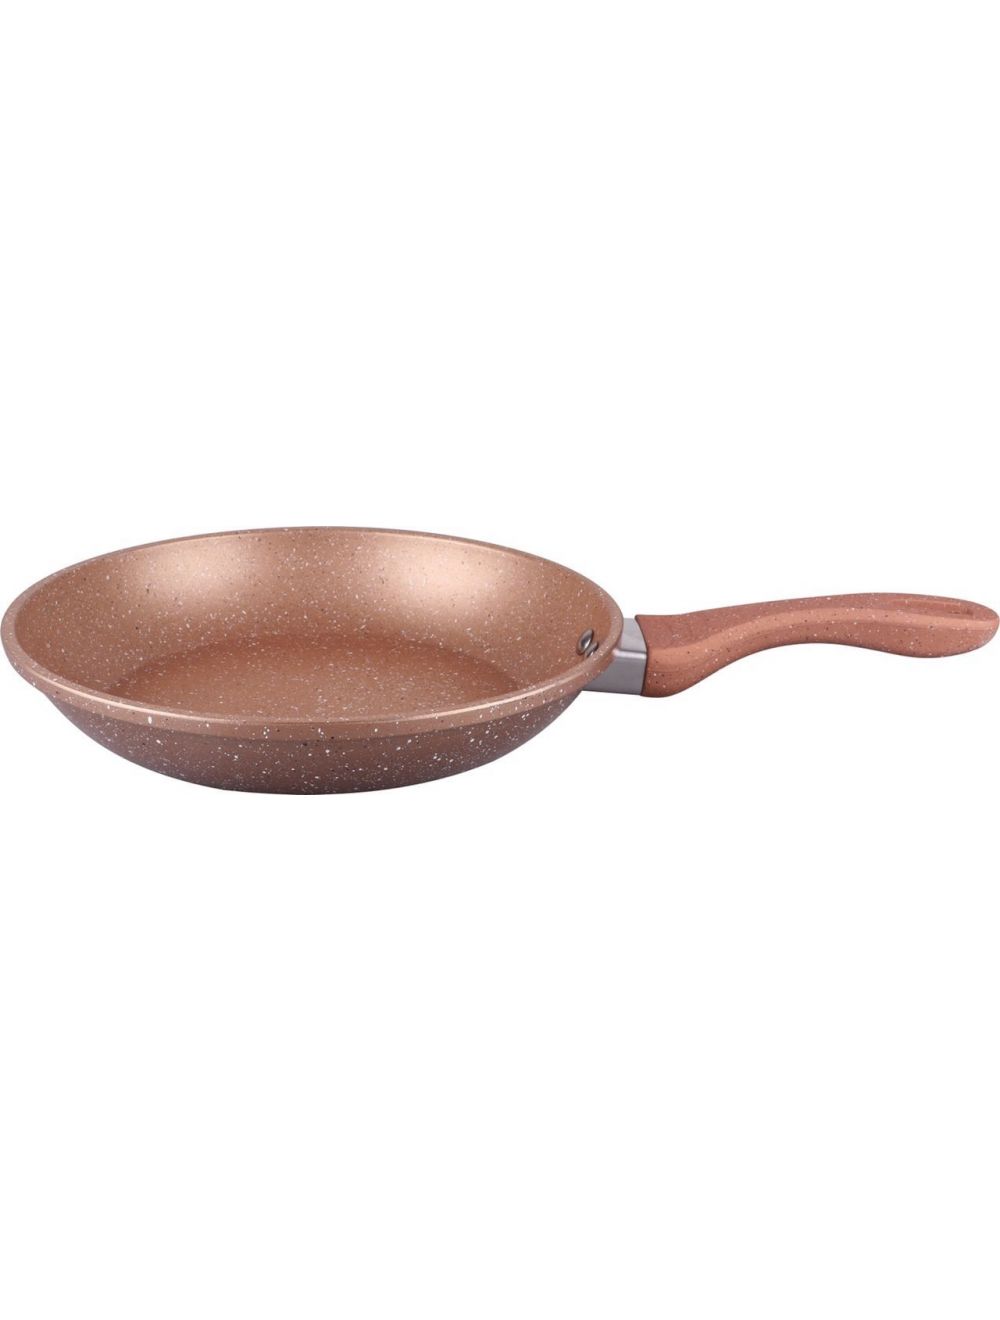 Dessini Granite Fry Pan Pink 32cm For Kitchen Best Quality In Use-AKA623